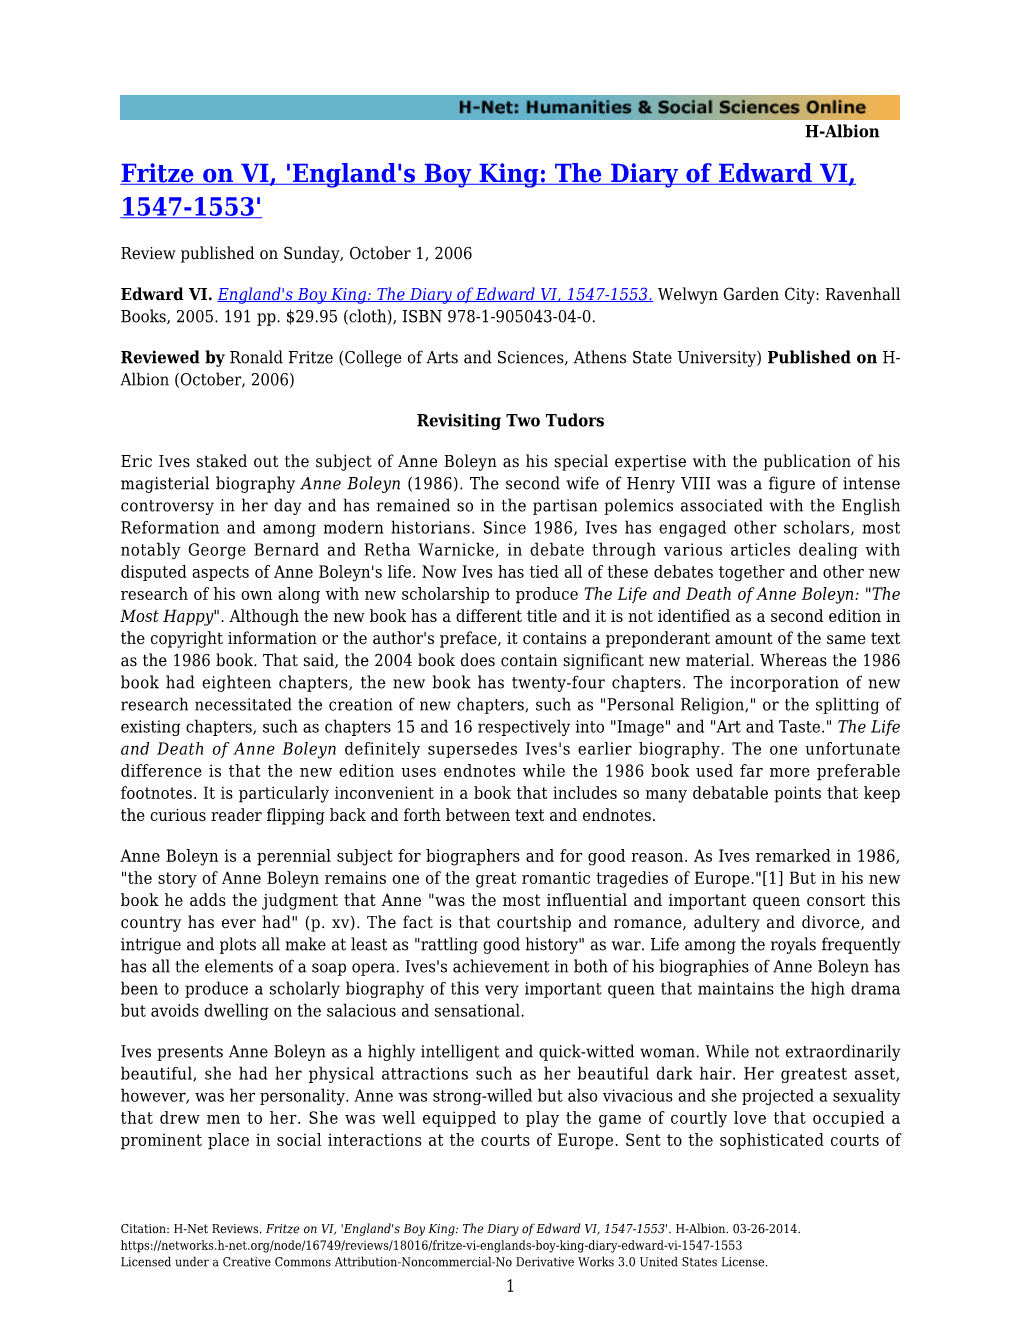 Fritze on VI, 'England's Boy King: the Diary of Edward VI, 1547-1553'